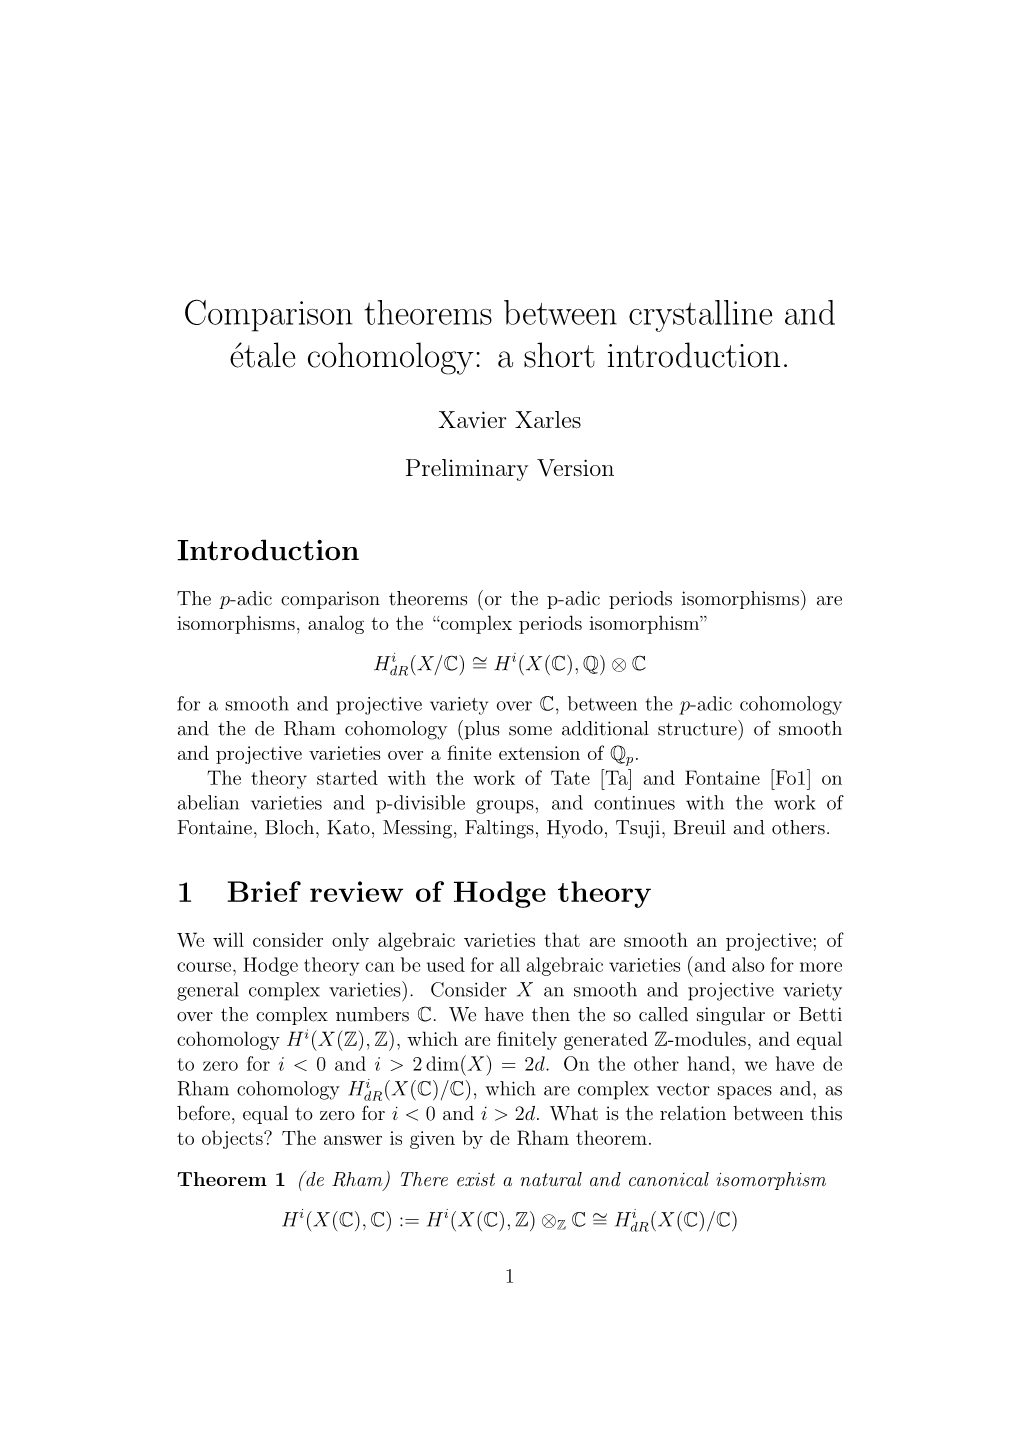 Comparison Theorems Between Crystalline and Étale Cohomology